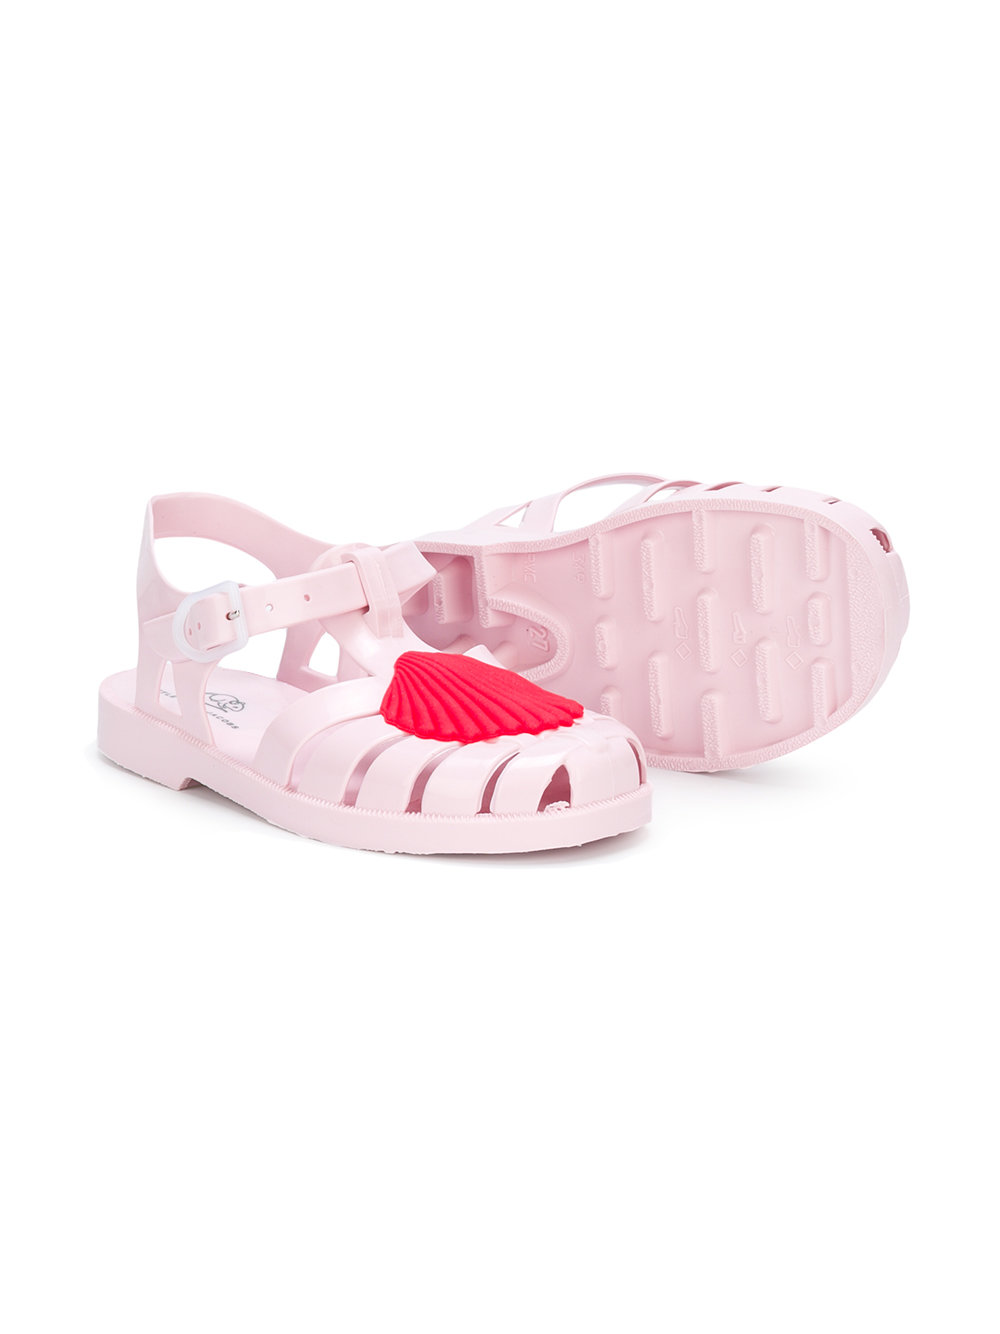 marc jacobs jelly shoes